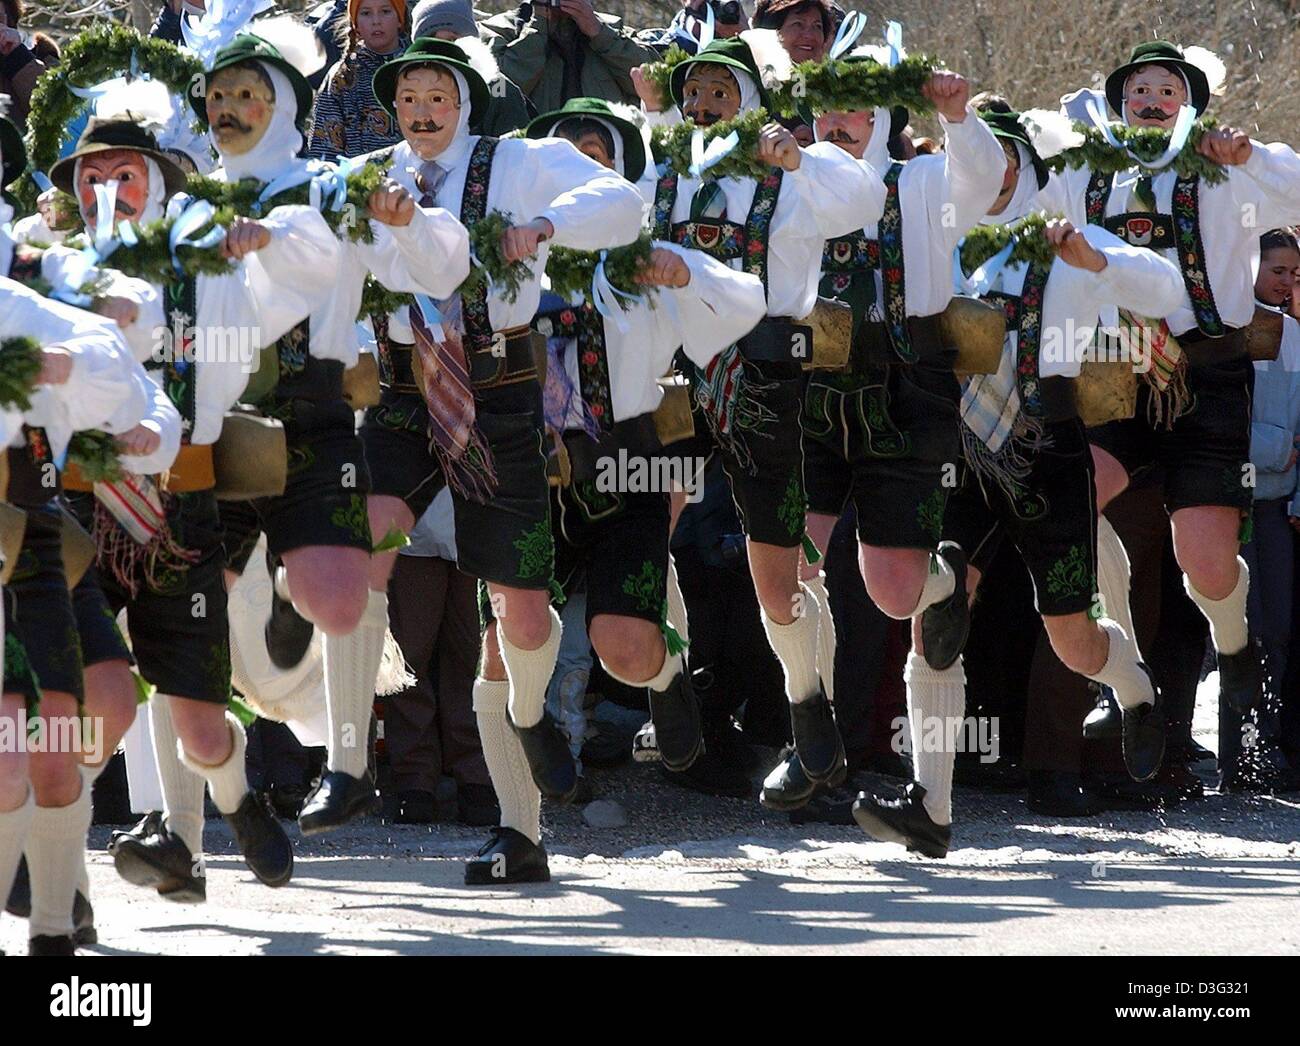 (dpa) - Masked men clad in identical Bavarian lederhosen (leather shorts) parade along a street while ringing cow bells in Mittenwald, Bavaria, Germany, 27 February 2003. As a carnival tradition in Mittenwald, these 'bell stirrers' ('Schellenruehrer') and their noise are meant to scare off the mean winter demons. Stock Photo